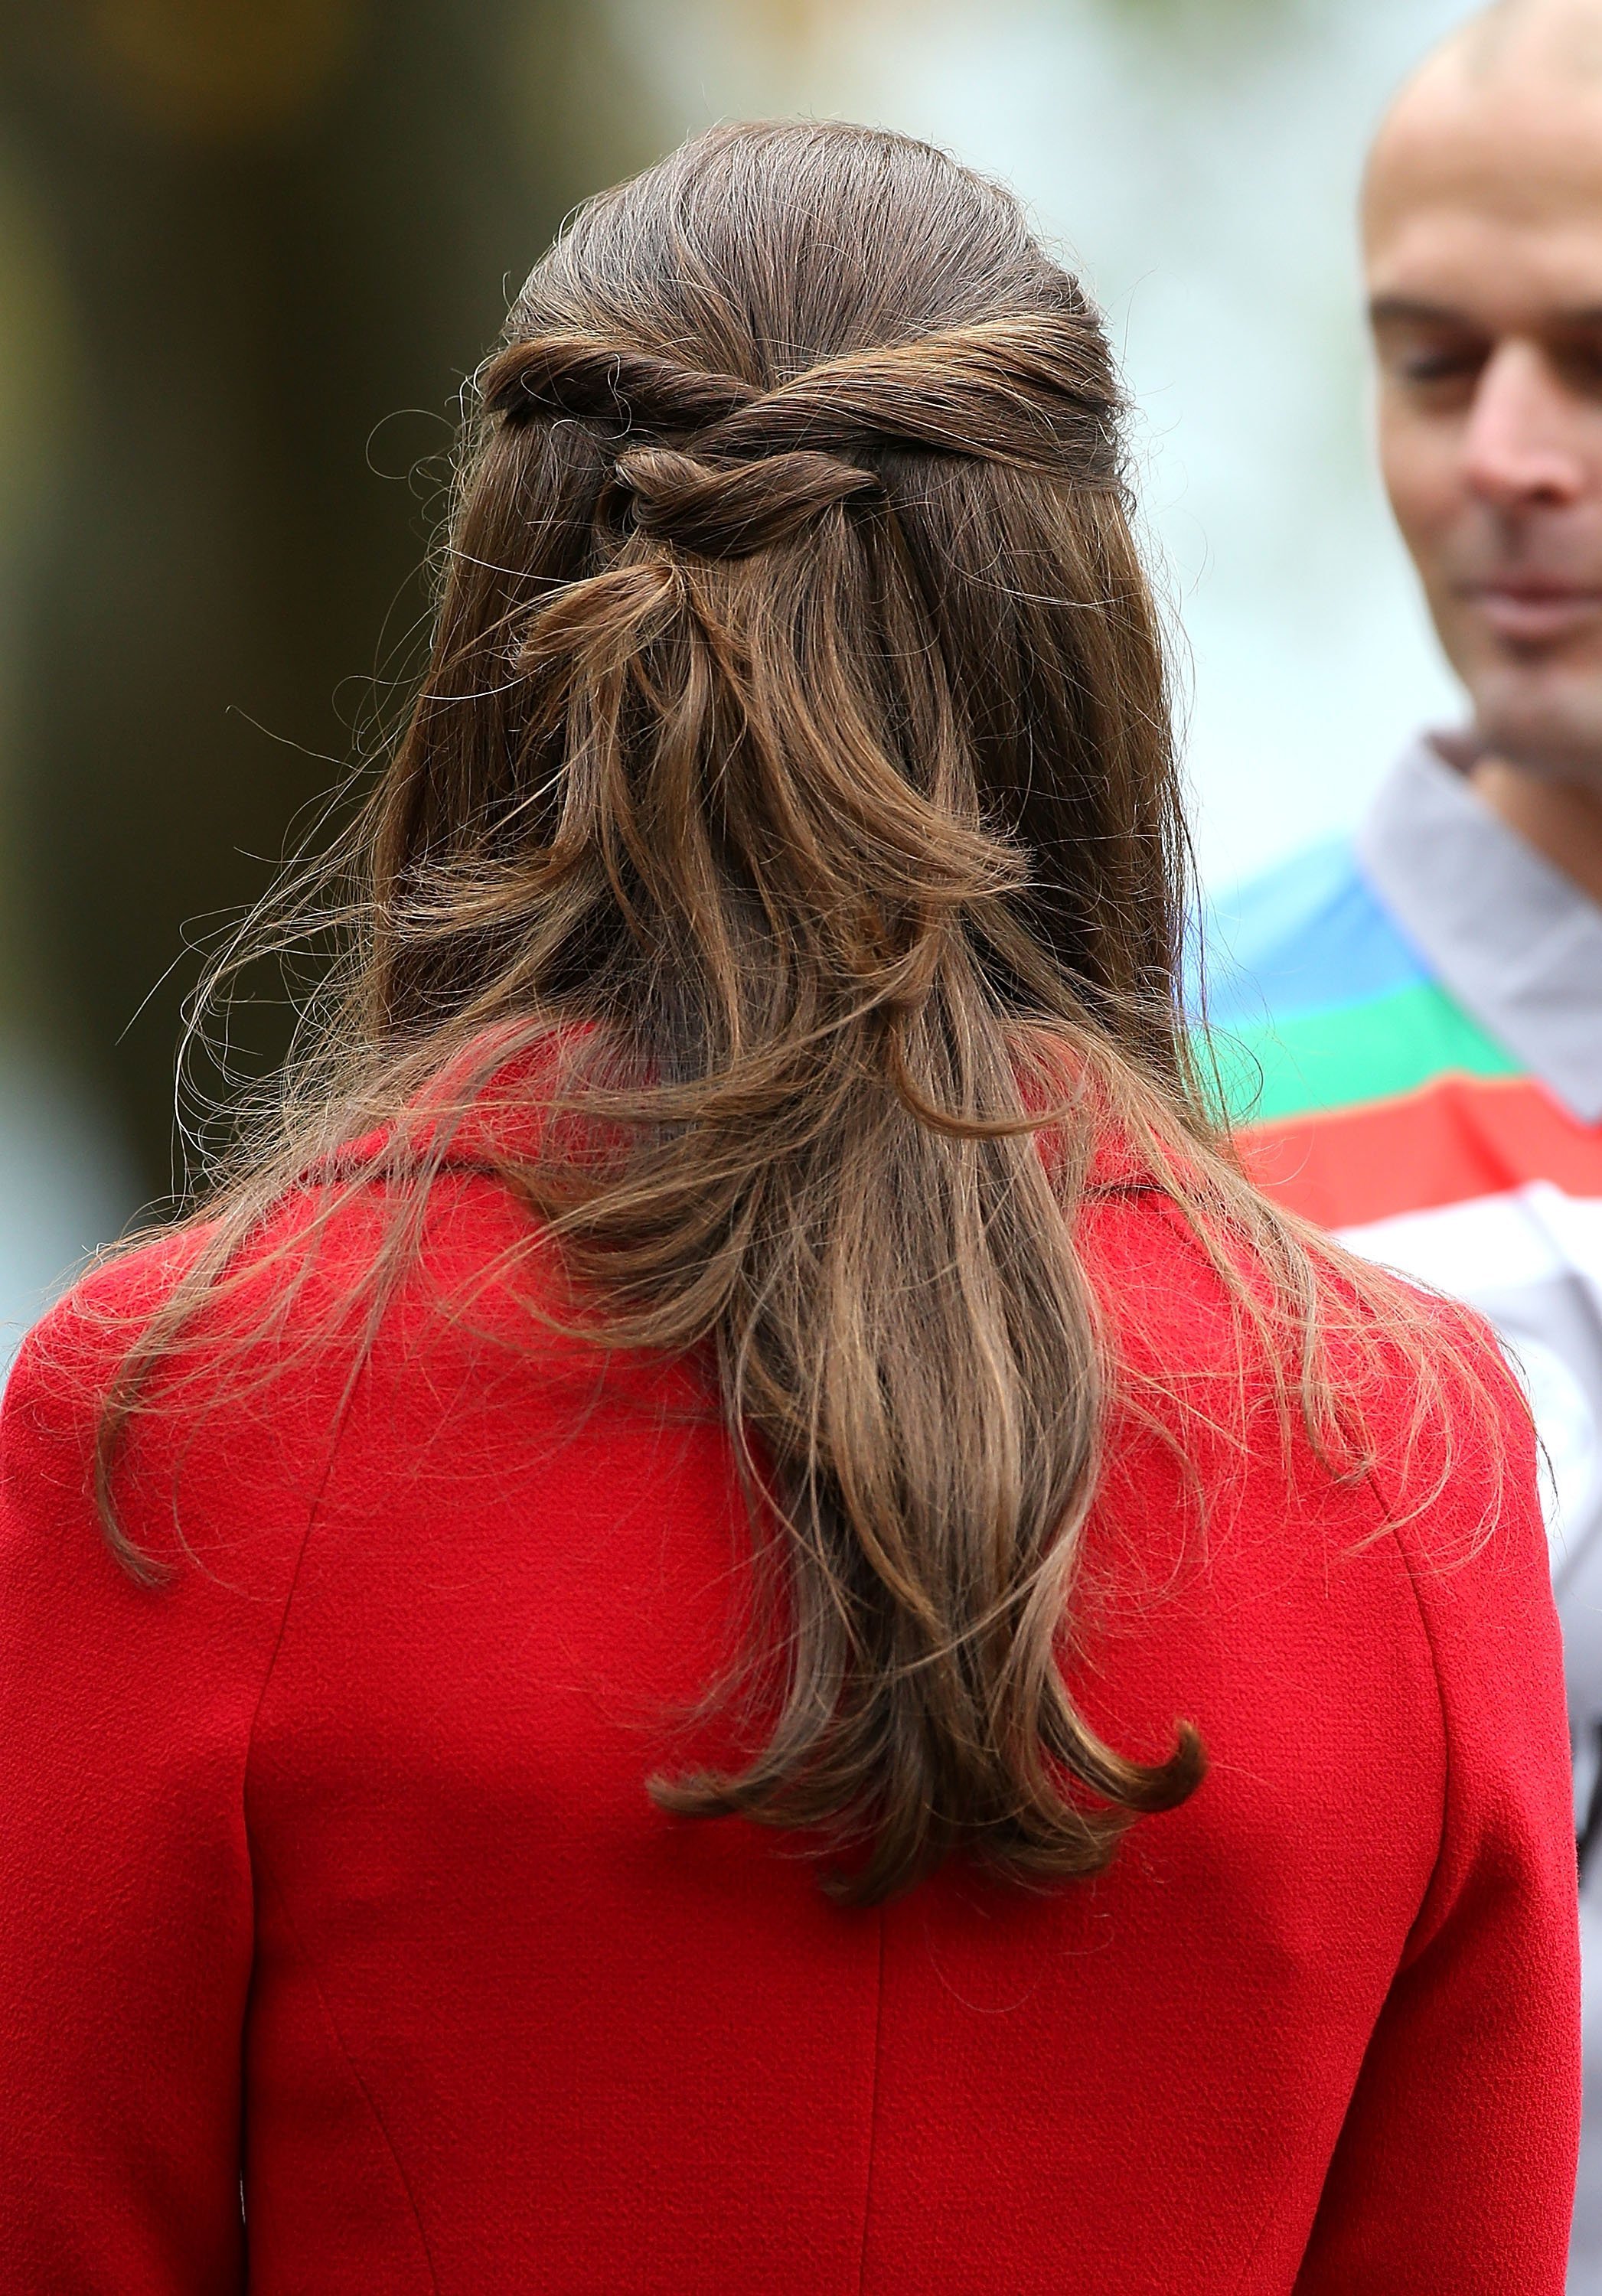 Kate Middleton on April 14, 2014 in Christchurch, New Zealand | Photo: Getty Images